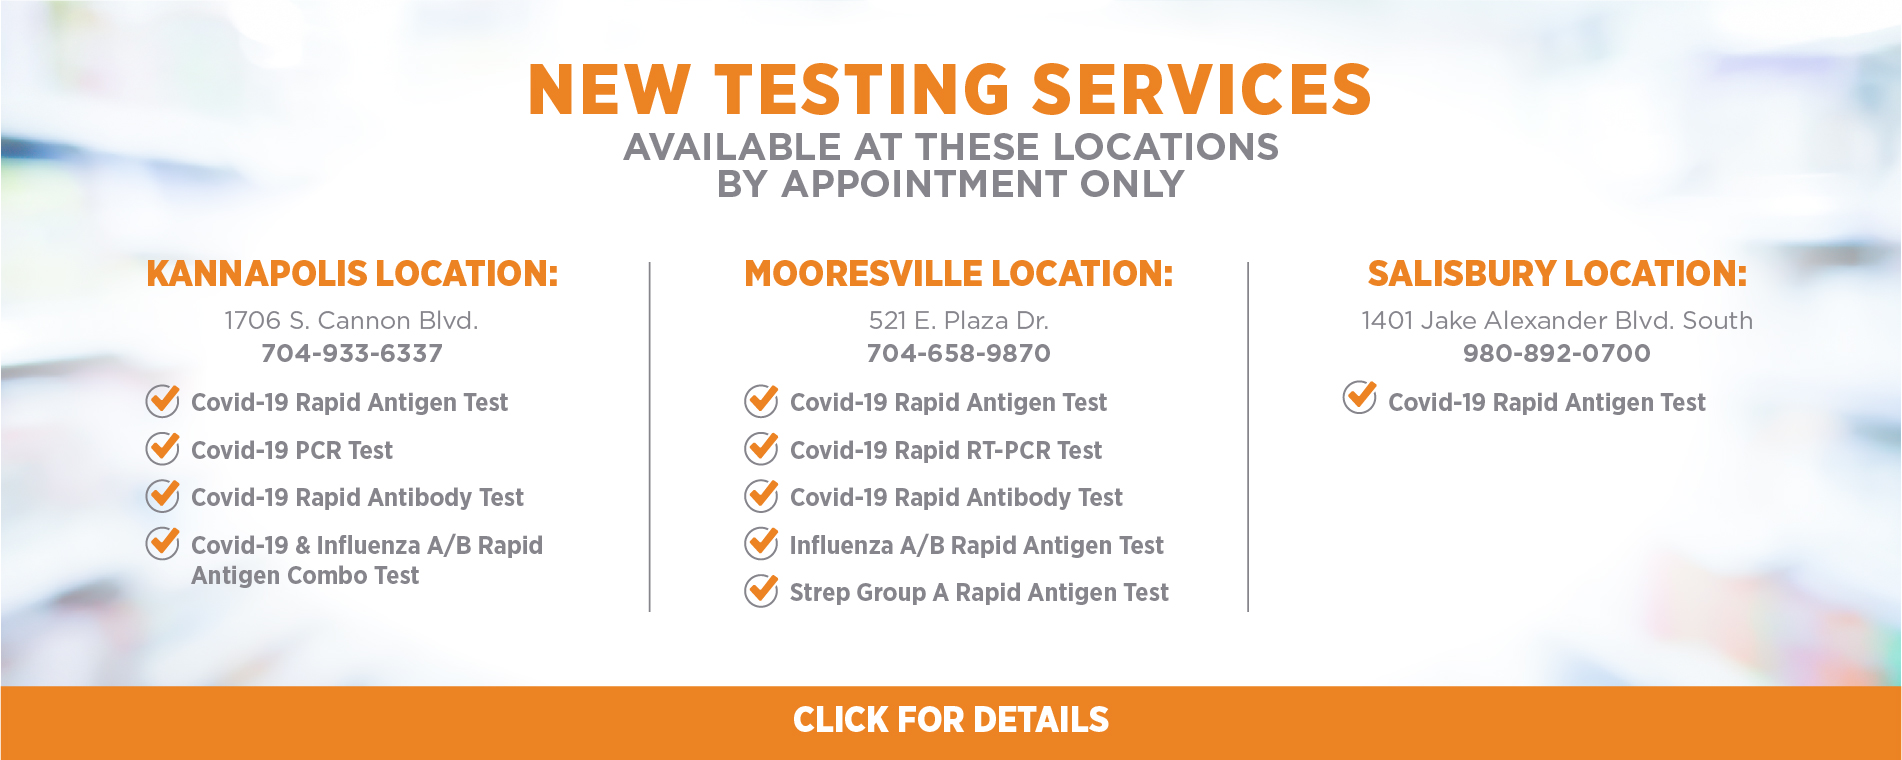 New Testing Services